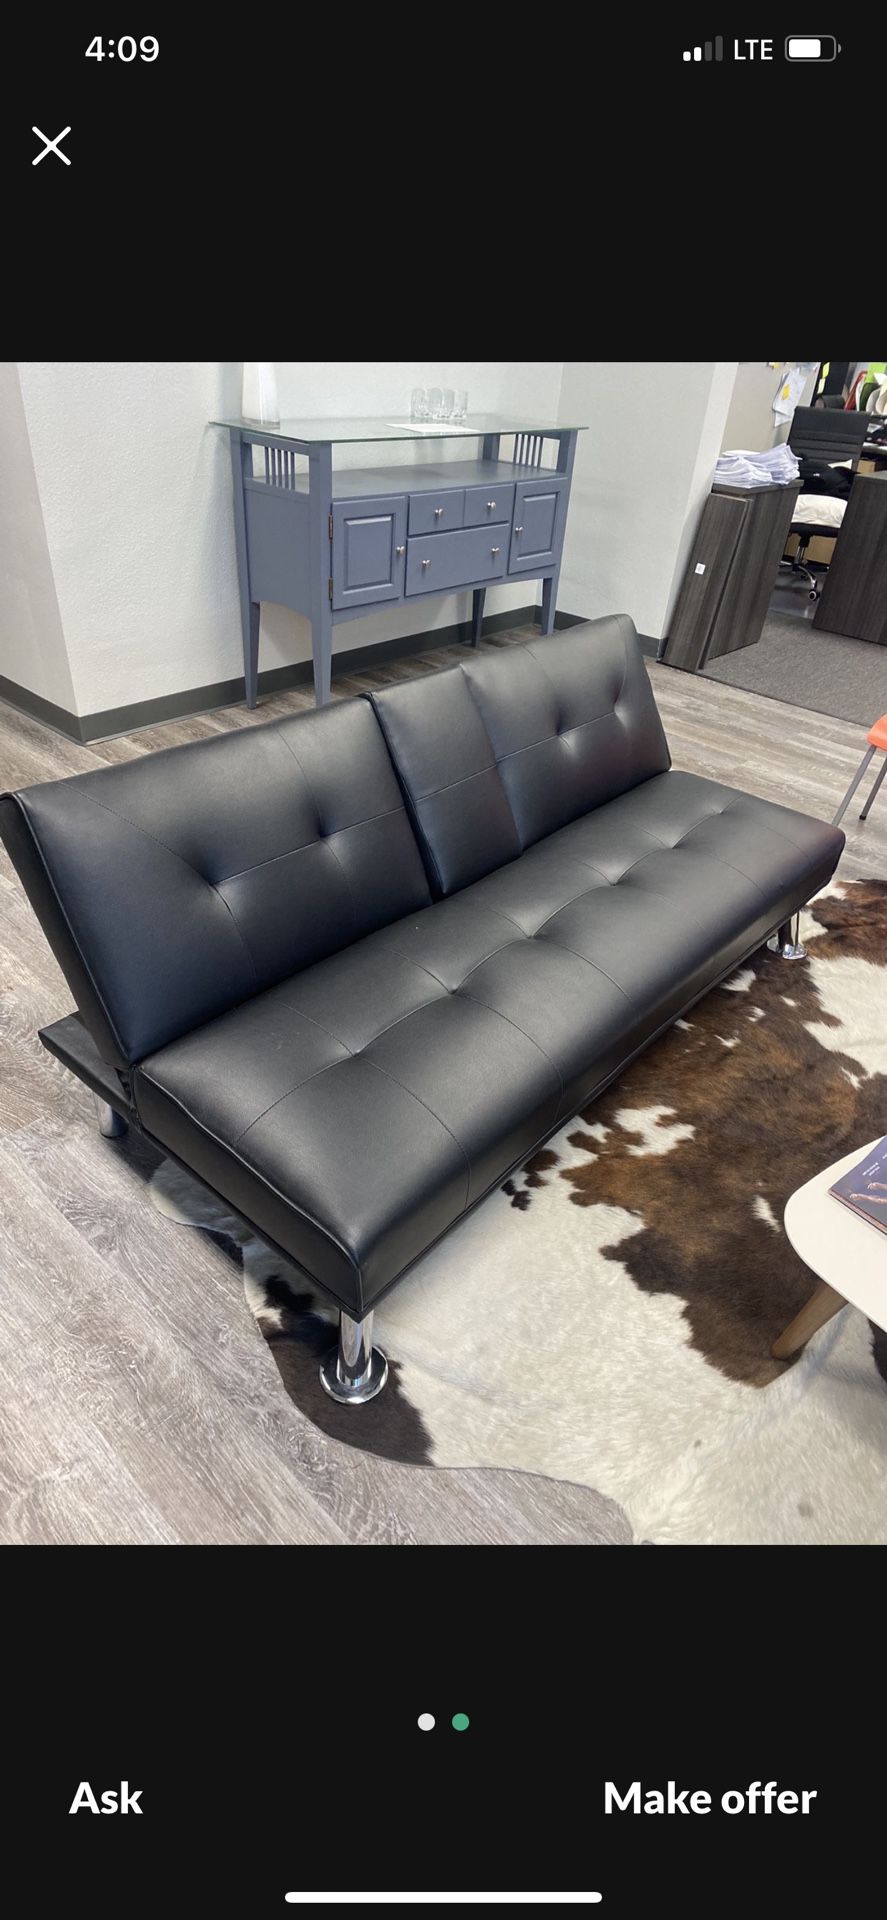 Leather Couch Futon